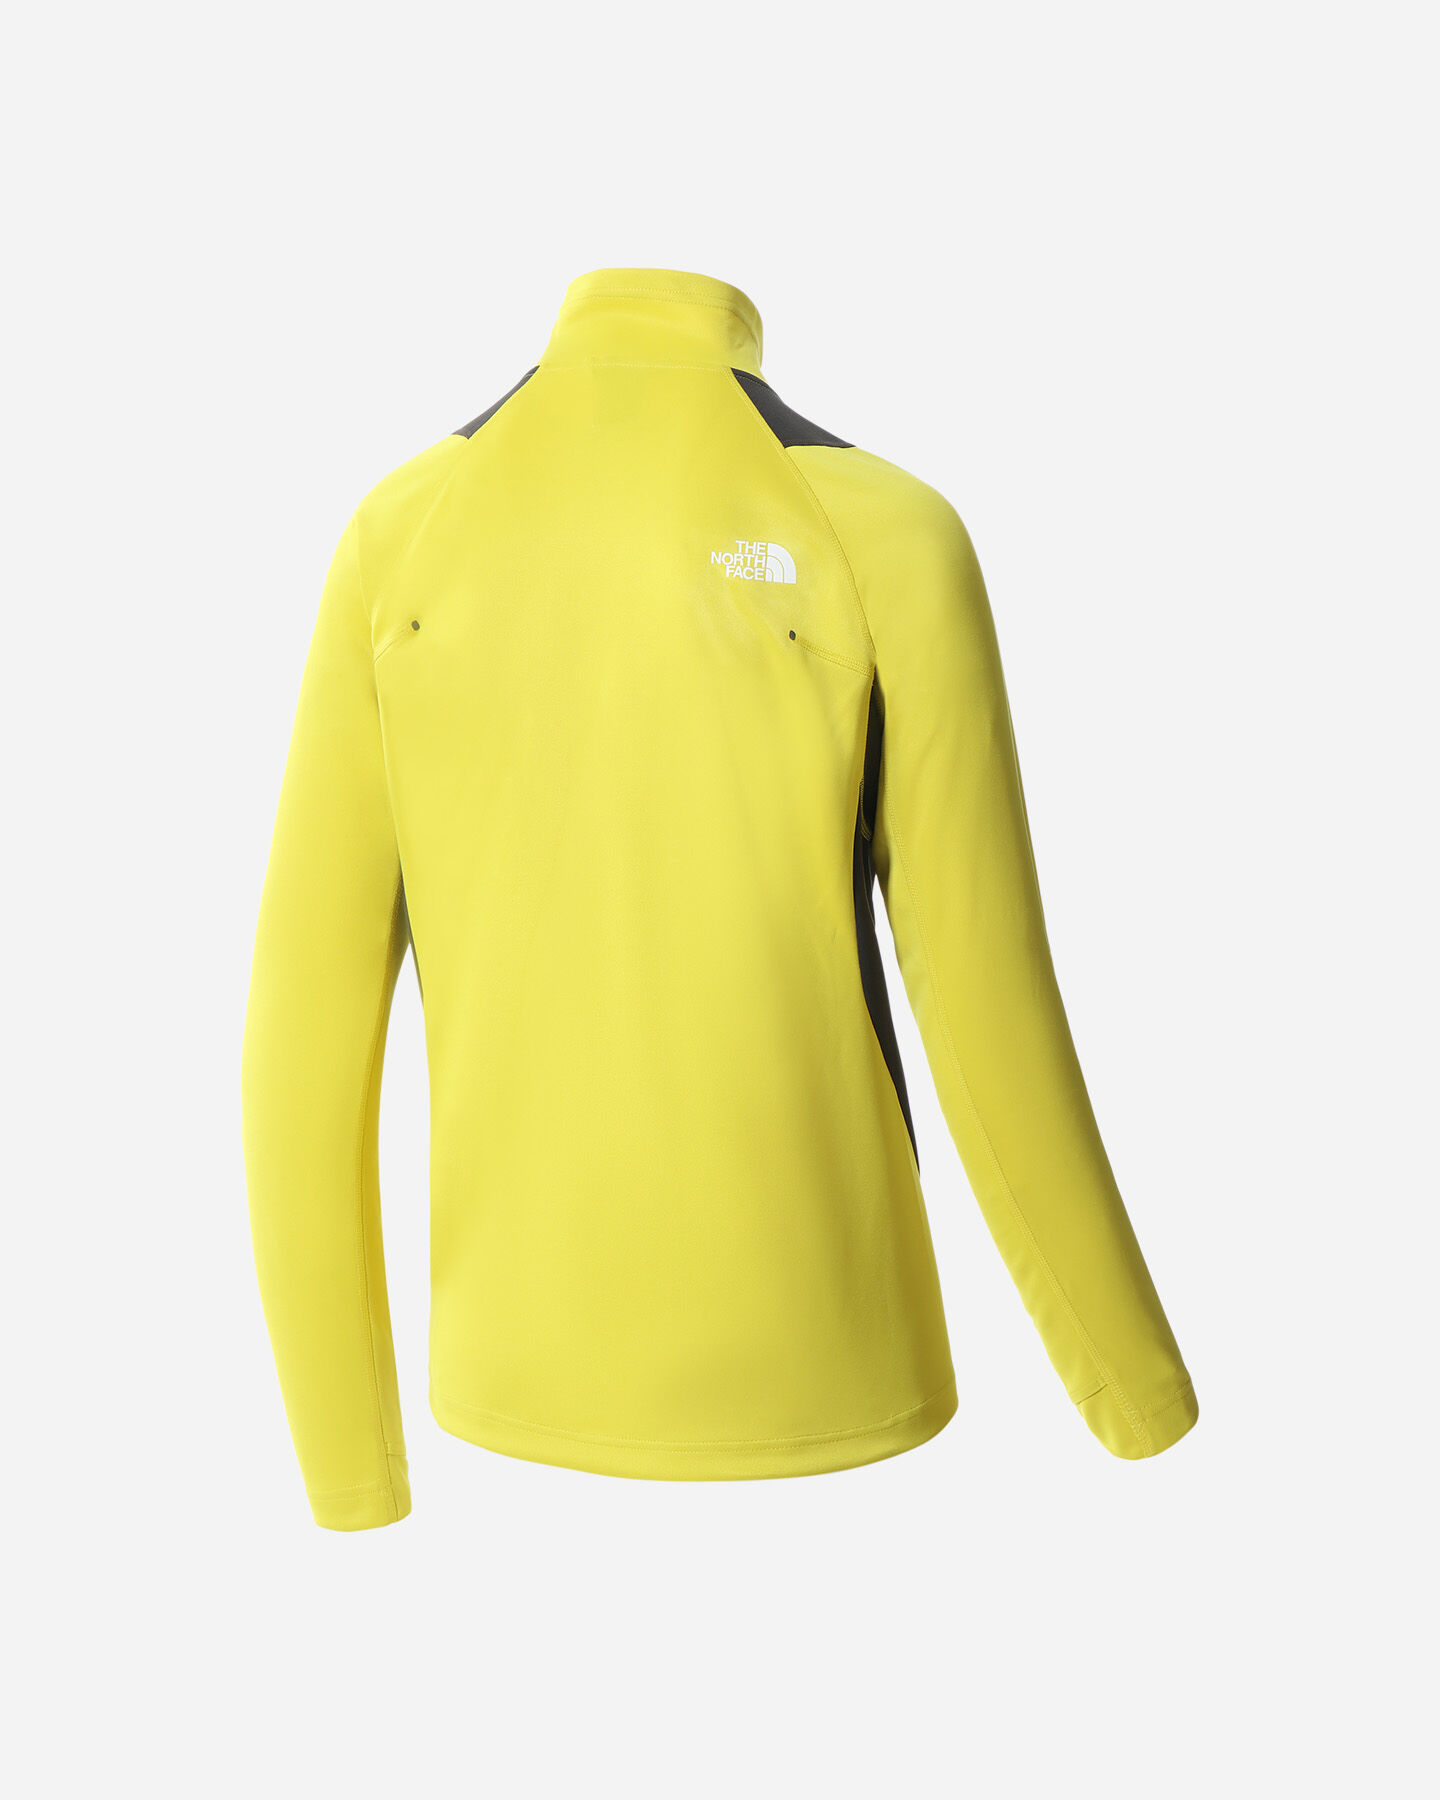  Pile THE NORTH FACE FULL ZIP MIDLAYER M S5423236|W8B|L scatto 1